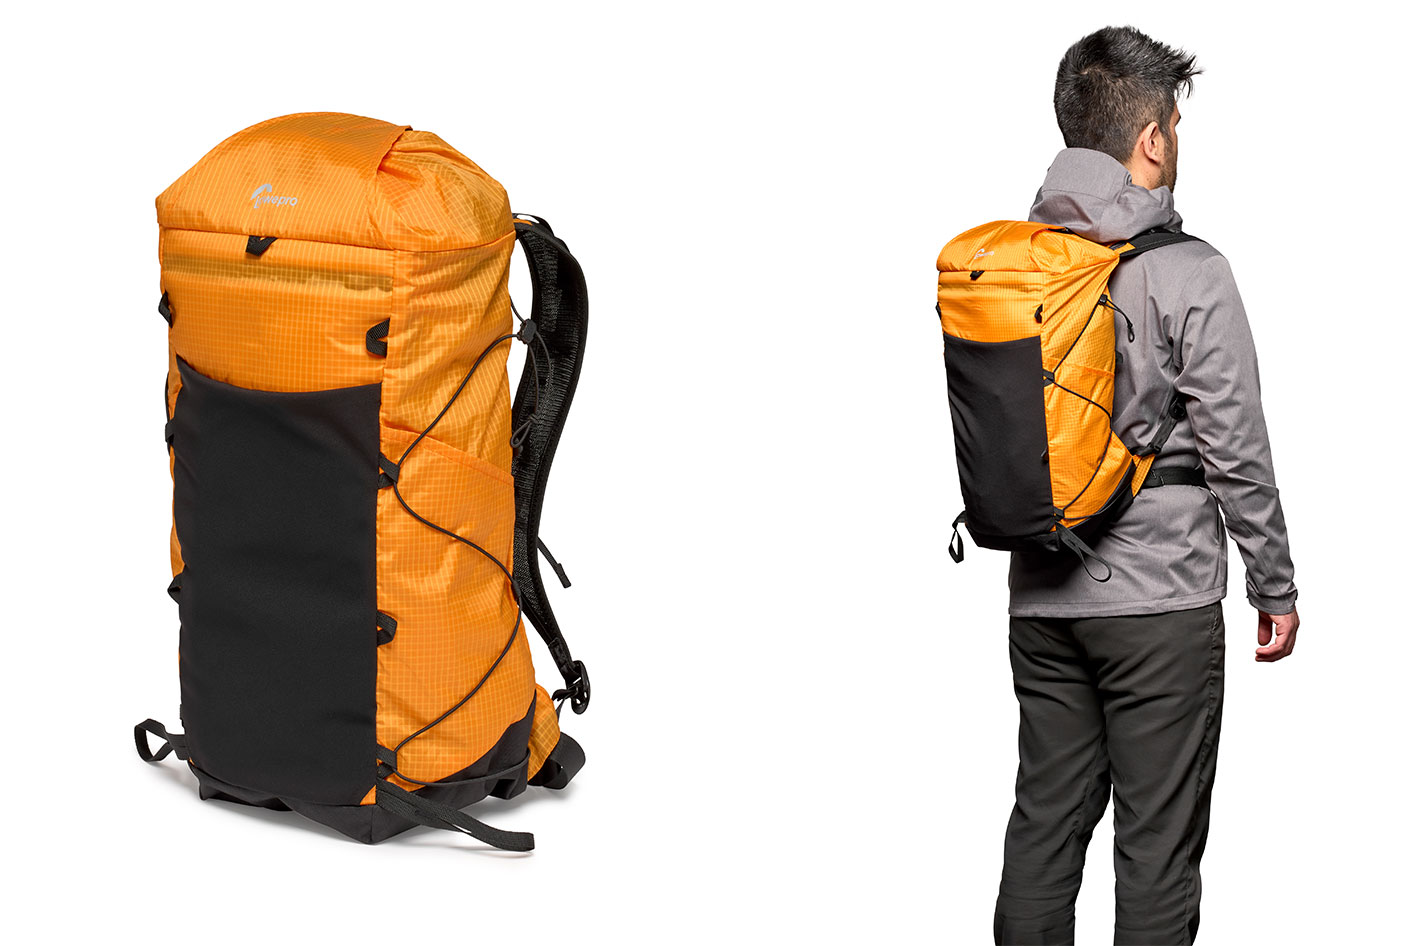 PhotoSport PRO: a new LowePro backpack with recycled fabric